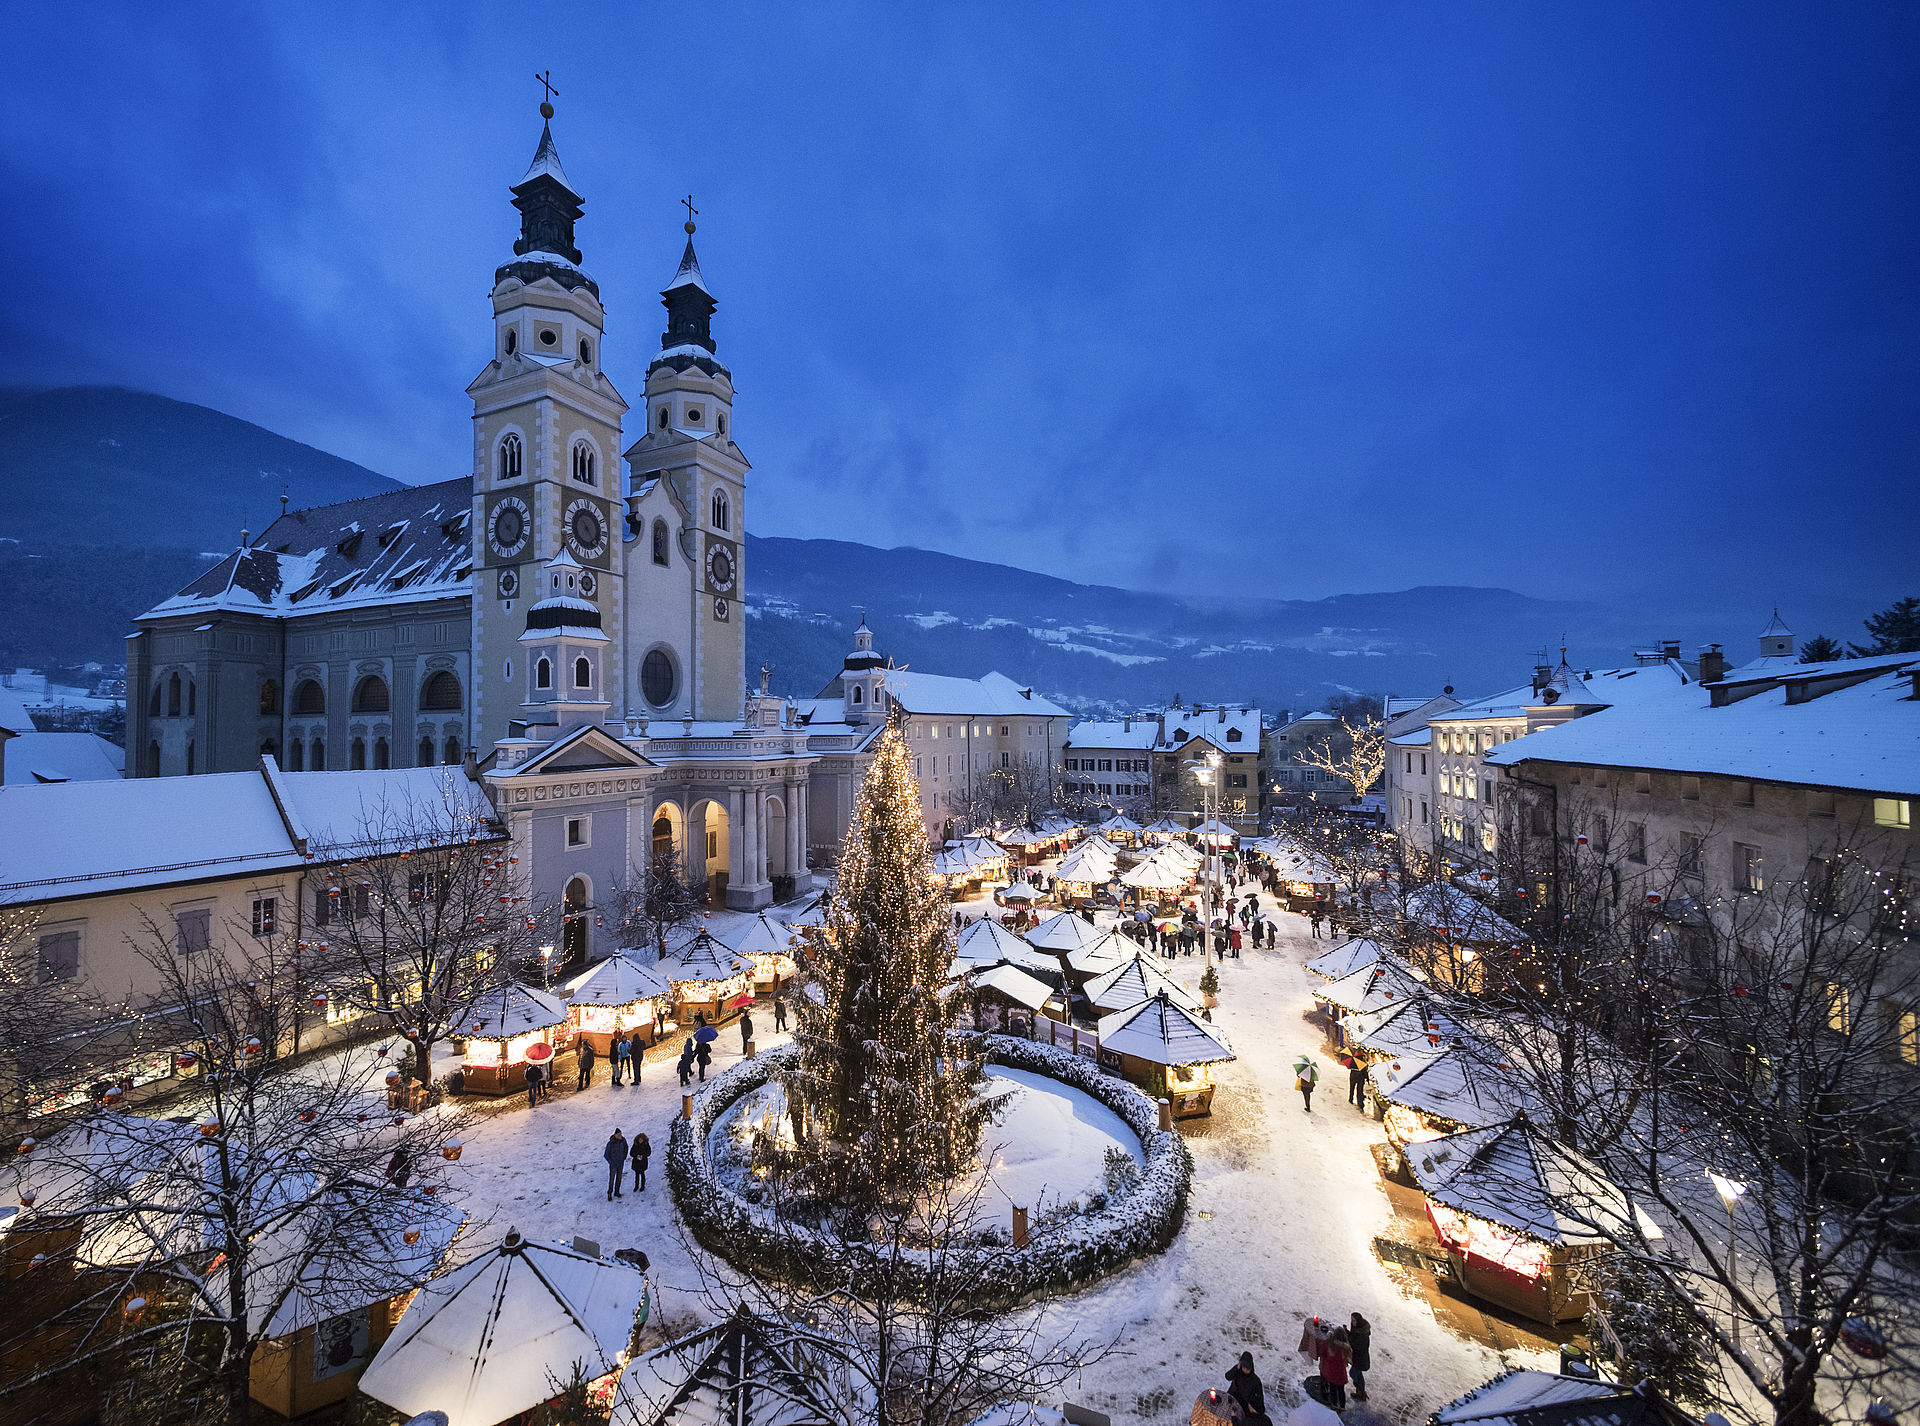 The cathedral square of Brixen in winter in the evening mood